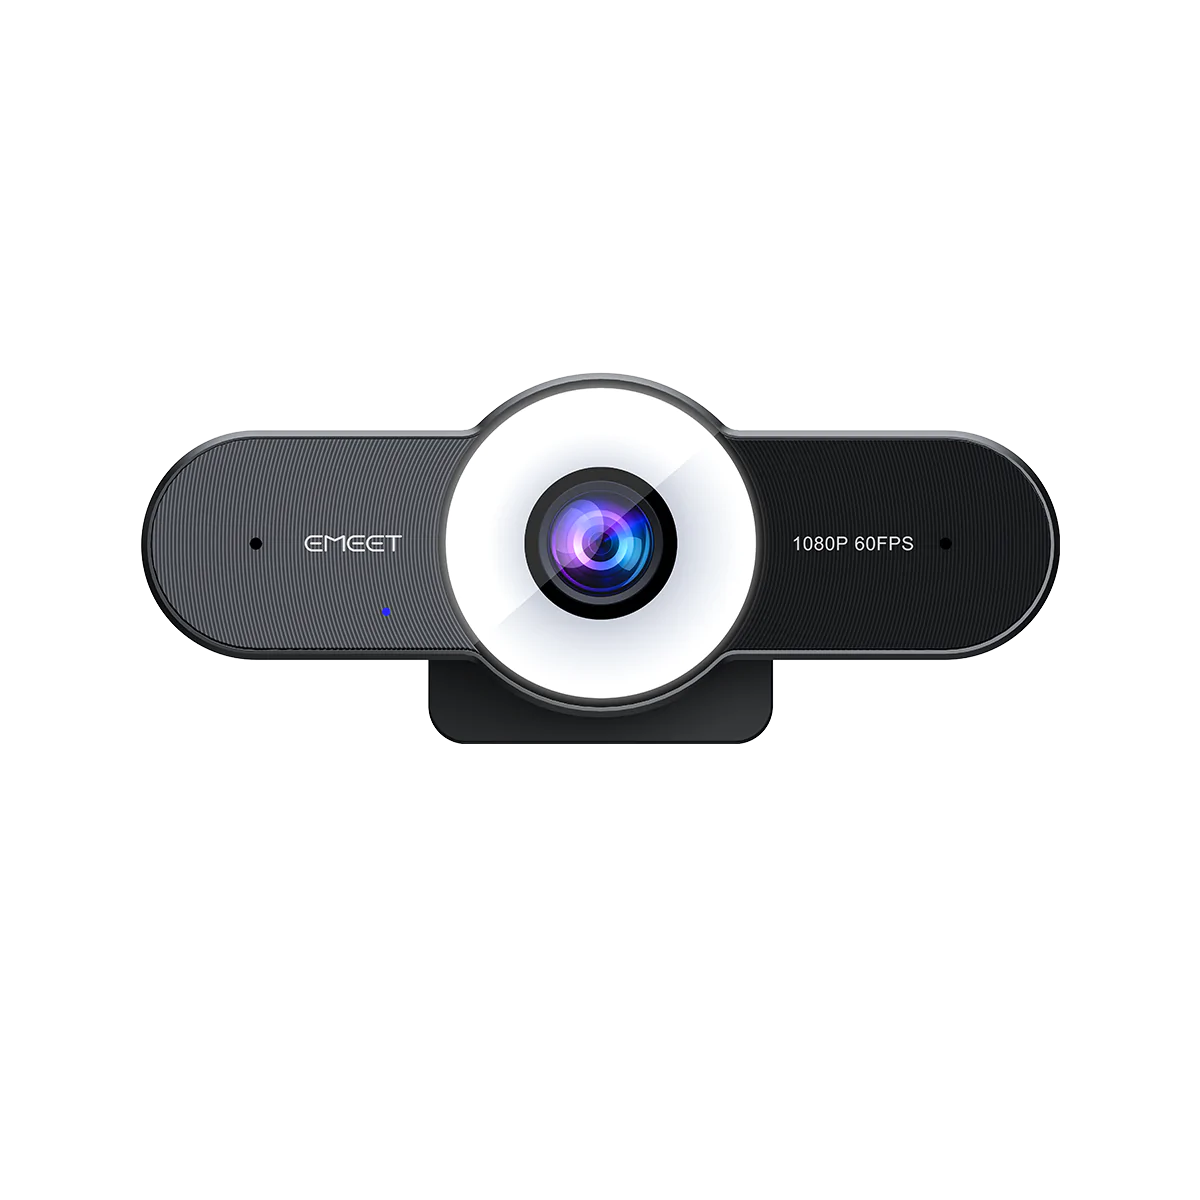 EMEET 1080P Webcam with Microphone - 60FPS Streaming Camera with Light, 3  Level Lights, 2 Noise-Cancelling Mics, C970L Computer Camera with Privacy